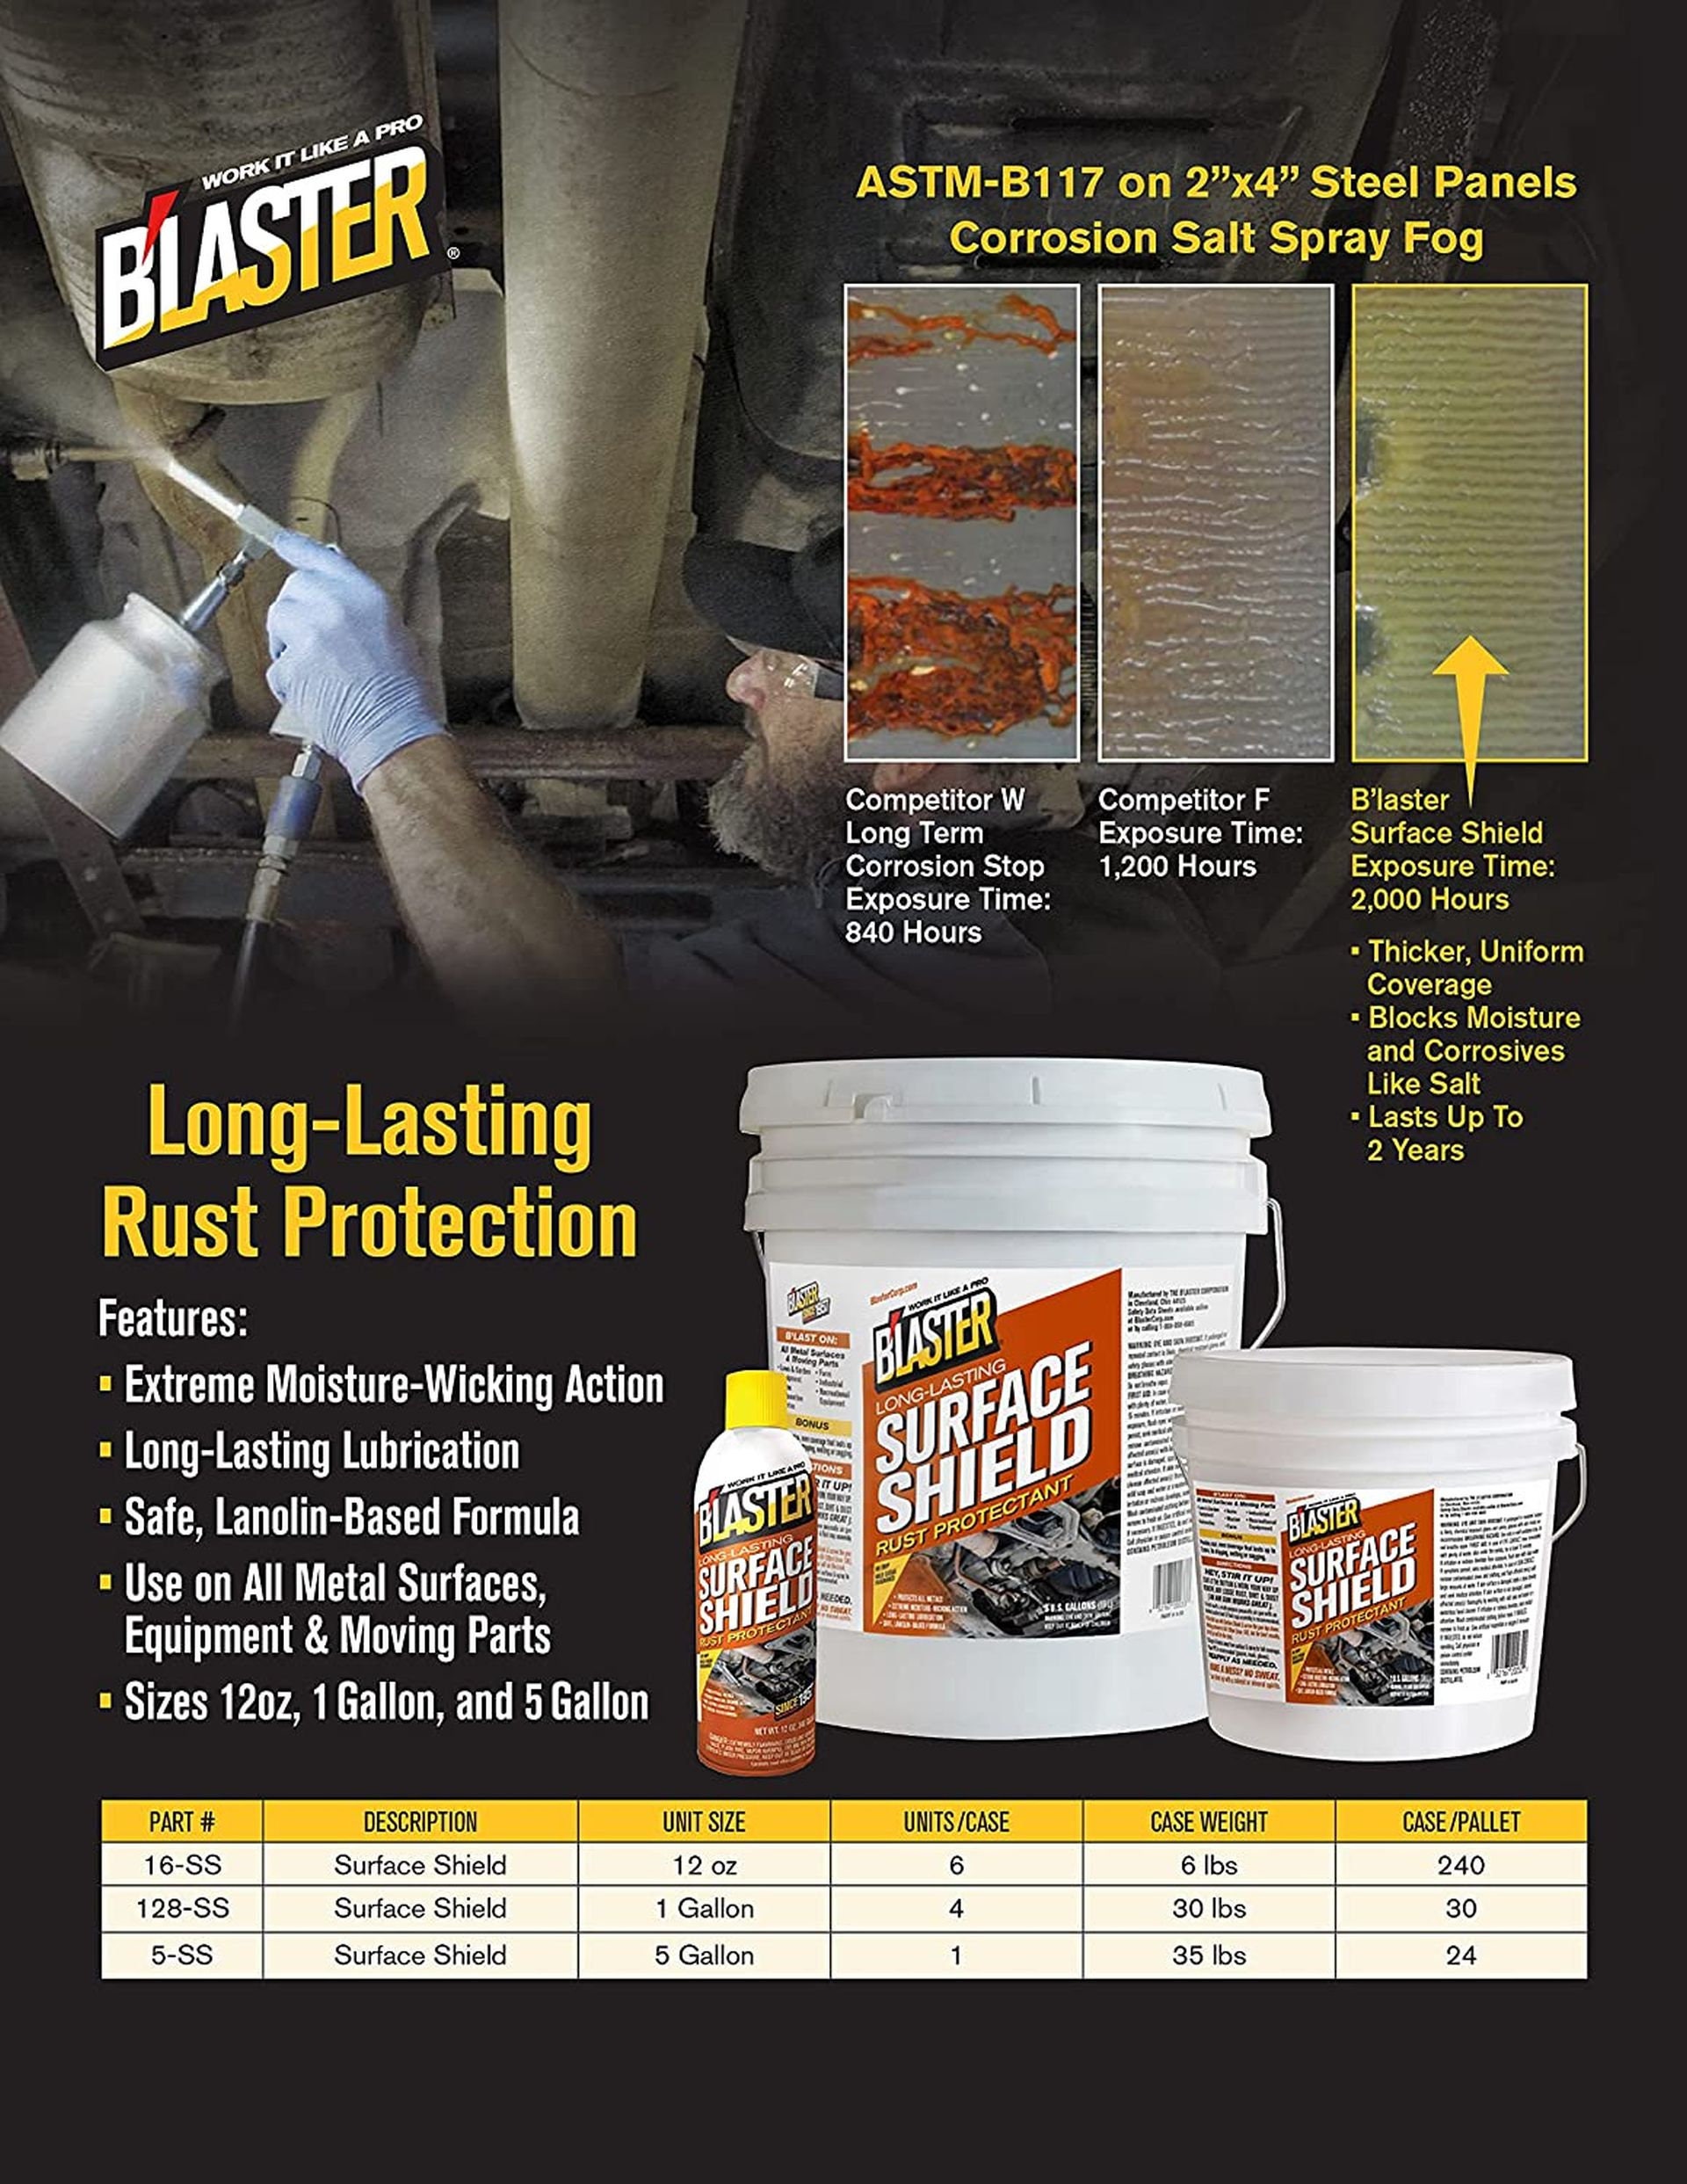 Blaster 12 oz. Long-Lasting Surface Shield Rust and Corrosion